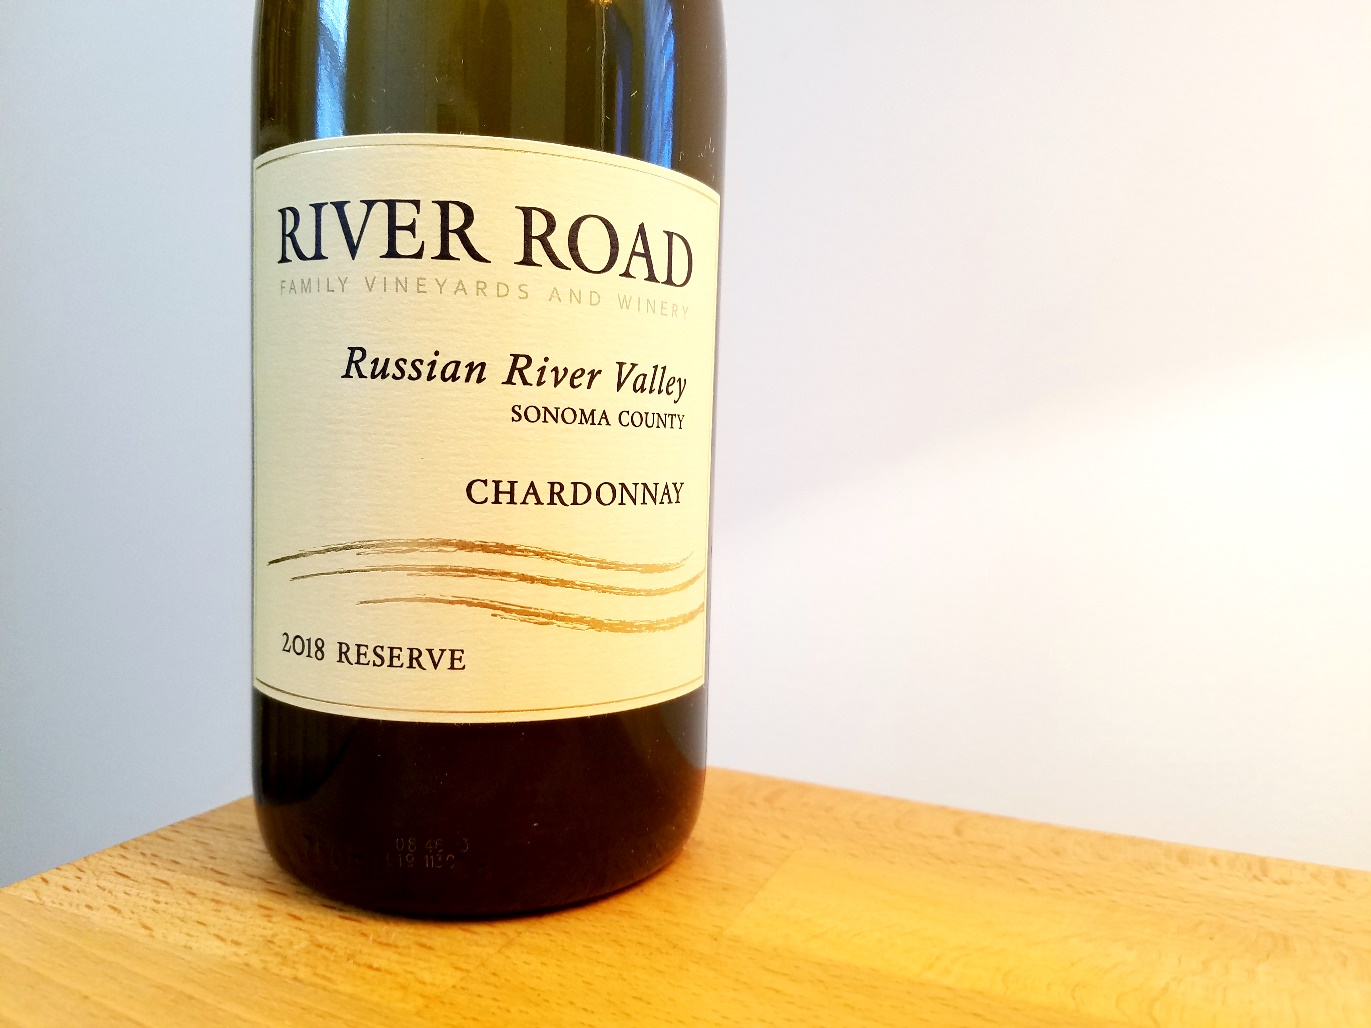 River Road Family Vineyards and Winery, Reserve Chardonnay 2018, Russian River Valley, Sonoma County, California, Wine Casual